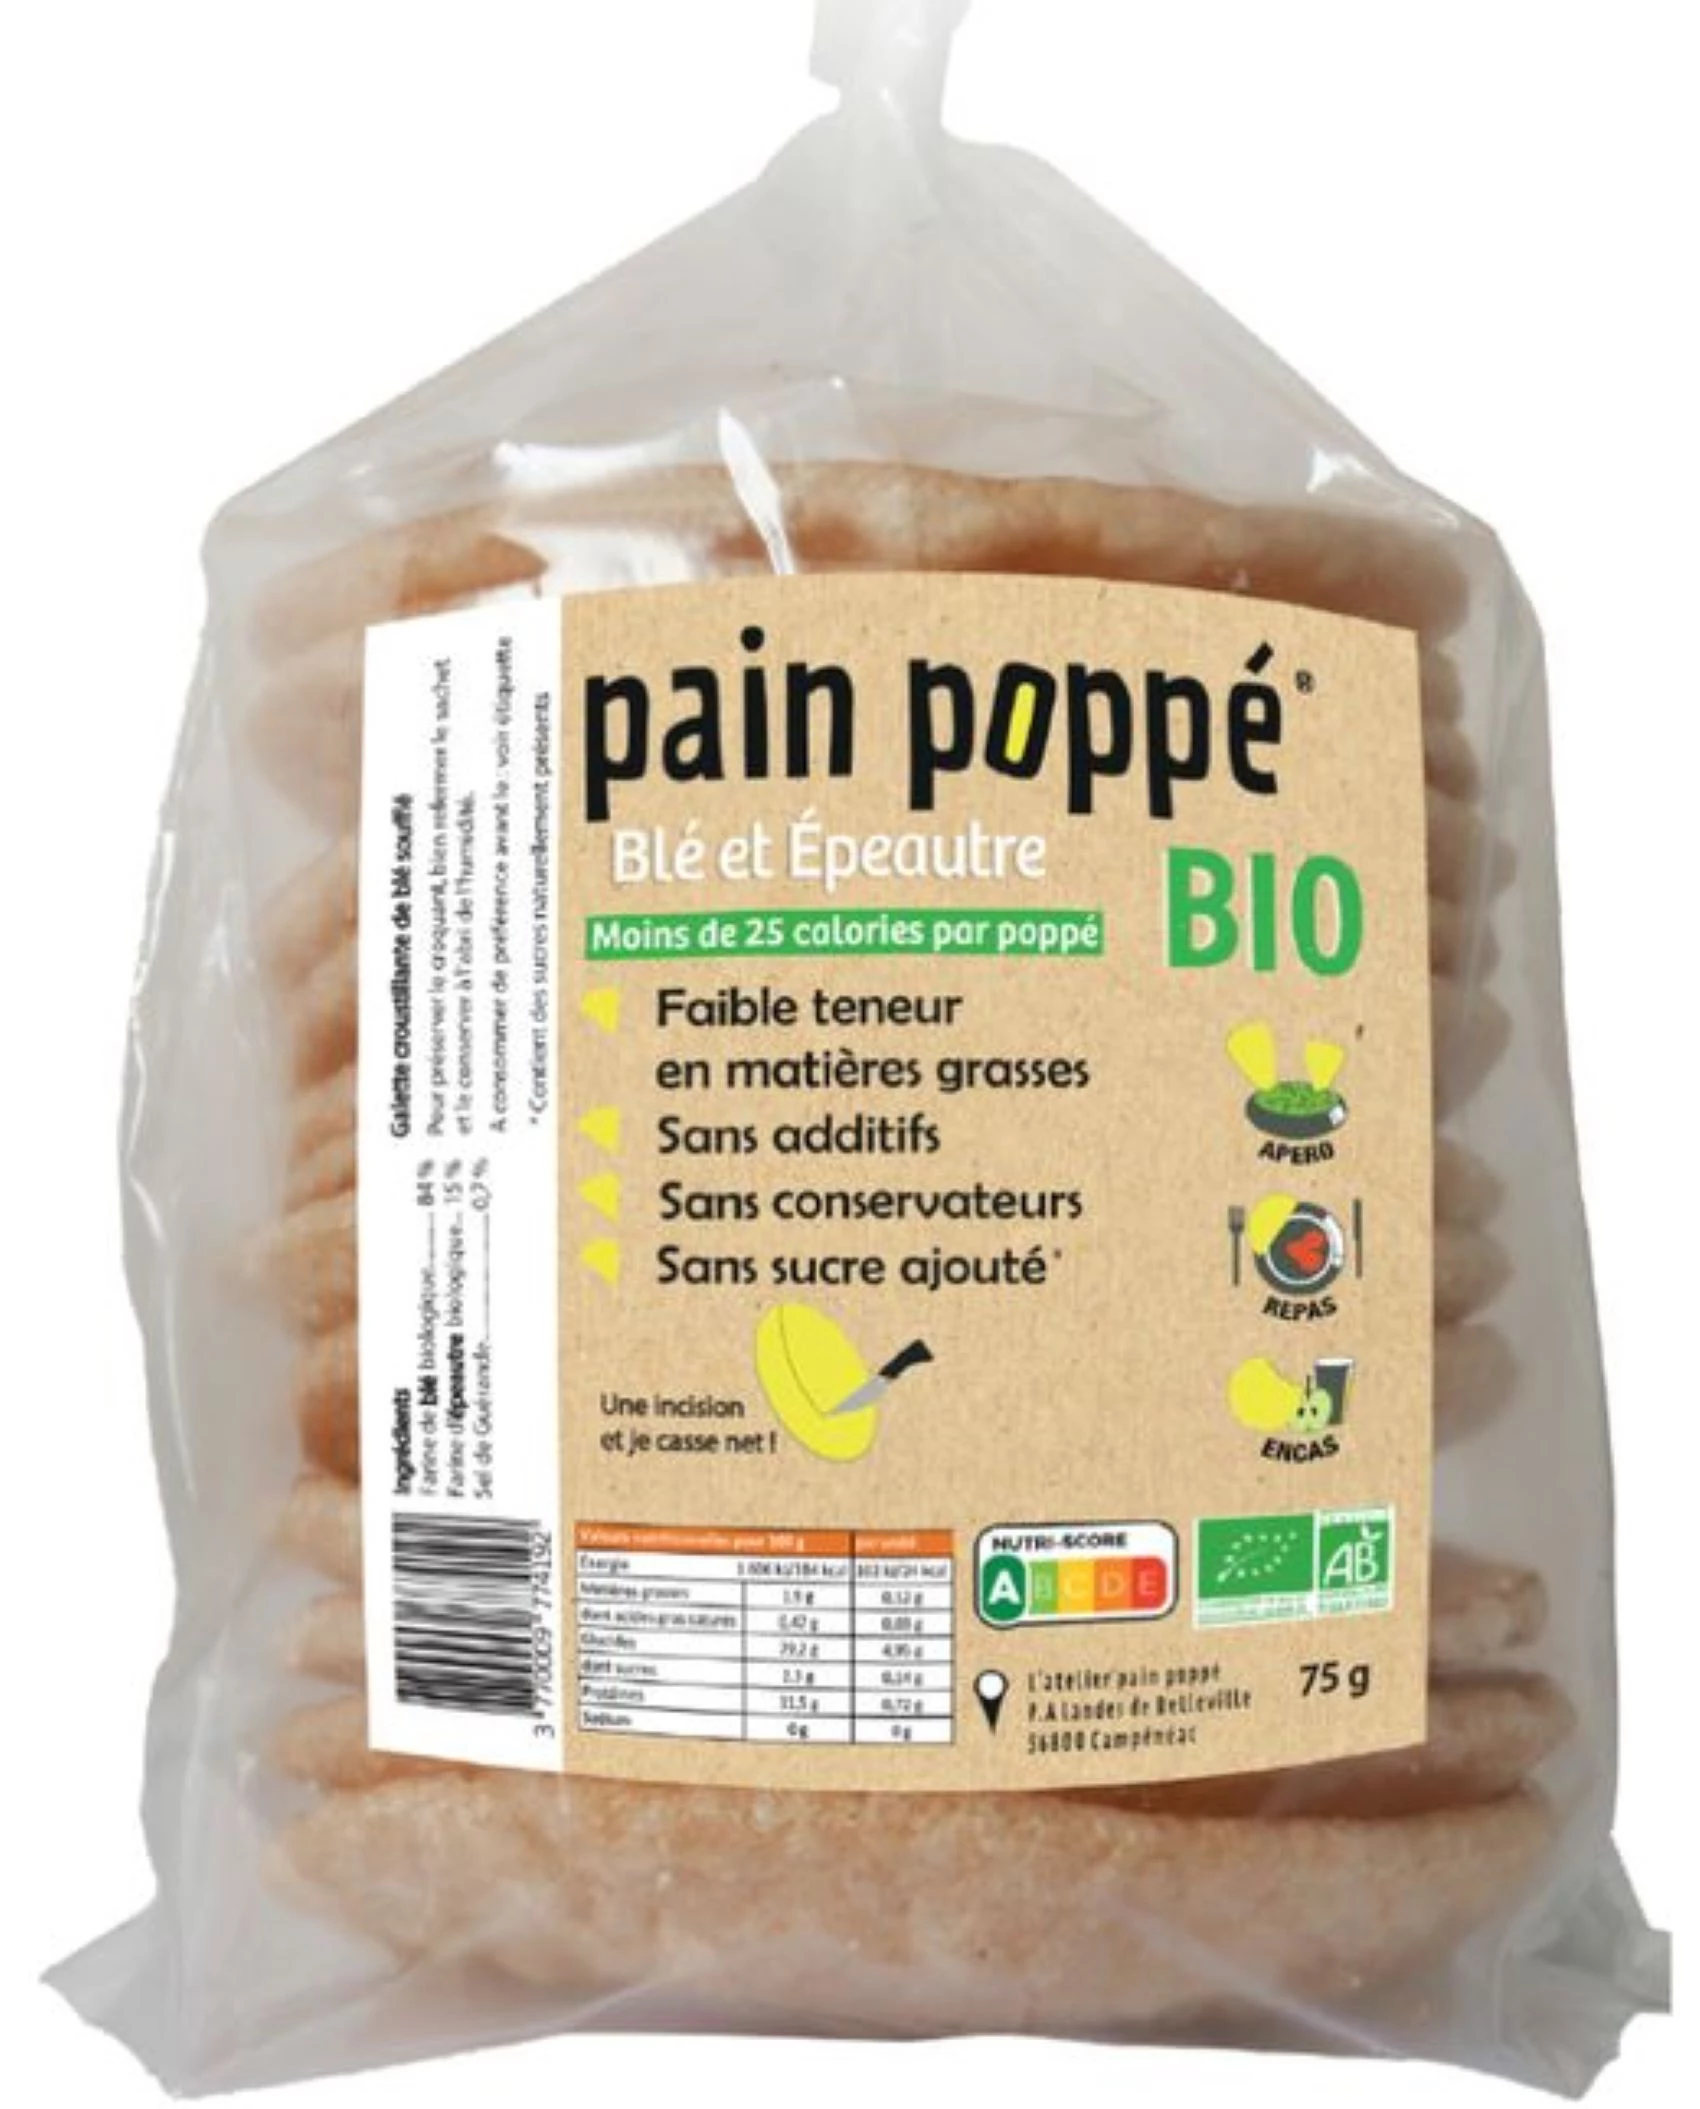 Pain Poippe Ble Epeautre Bio 7